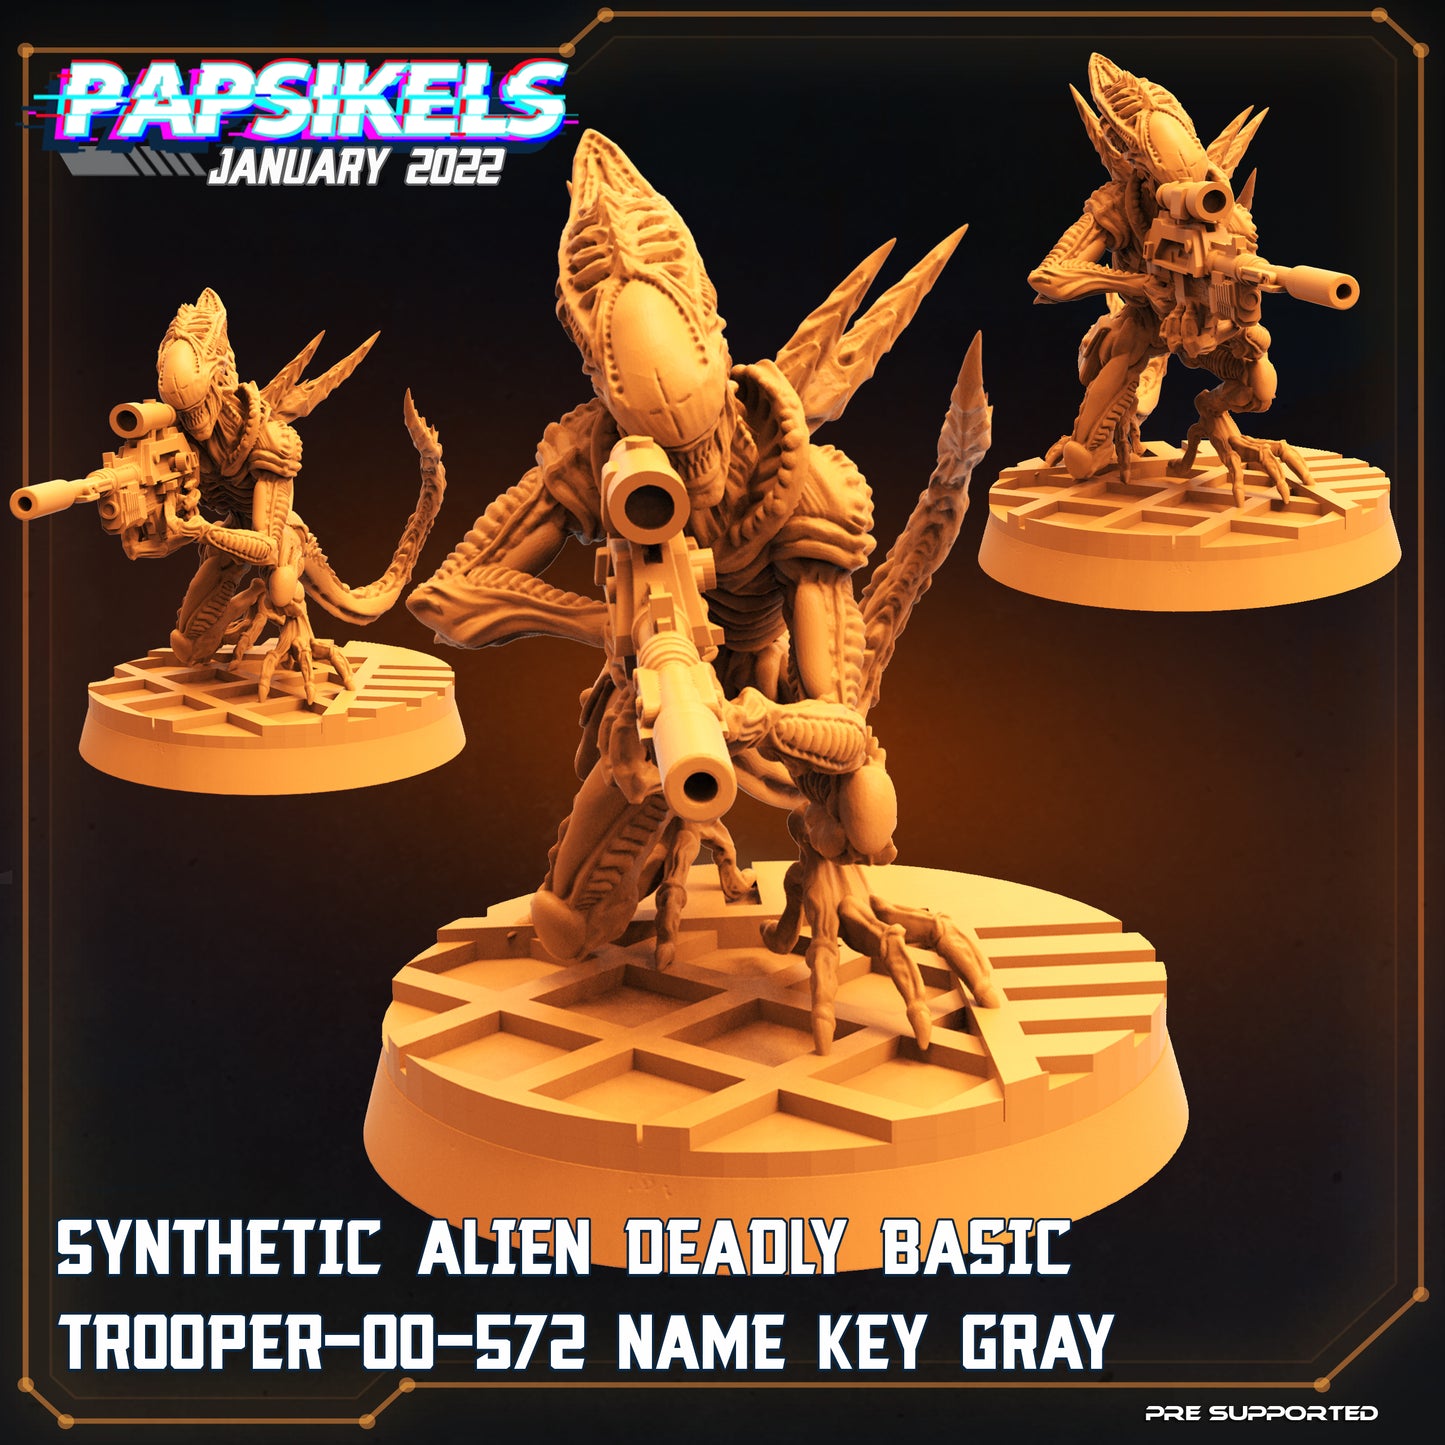 Synthetic Alien Deadly Basic Troop (9 variantes)